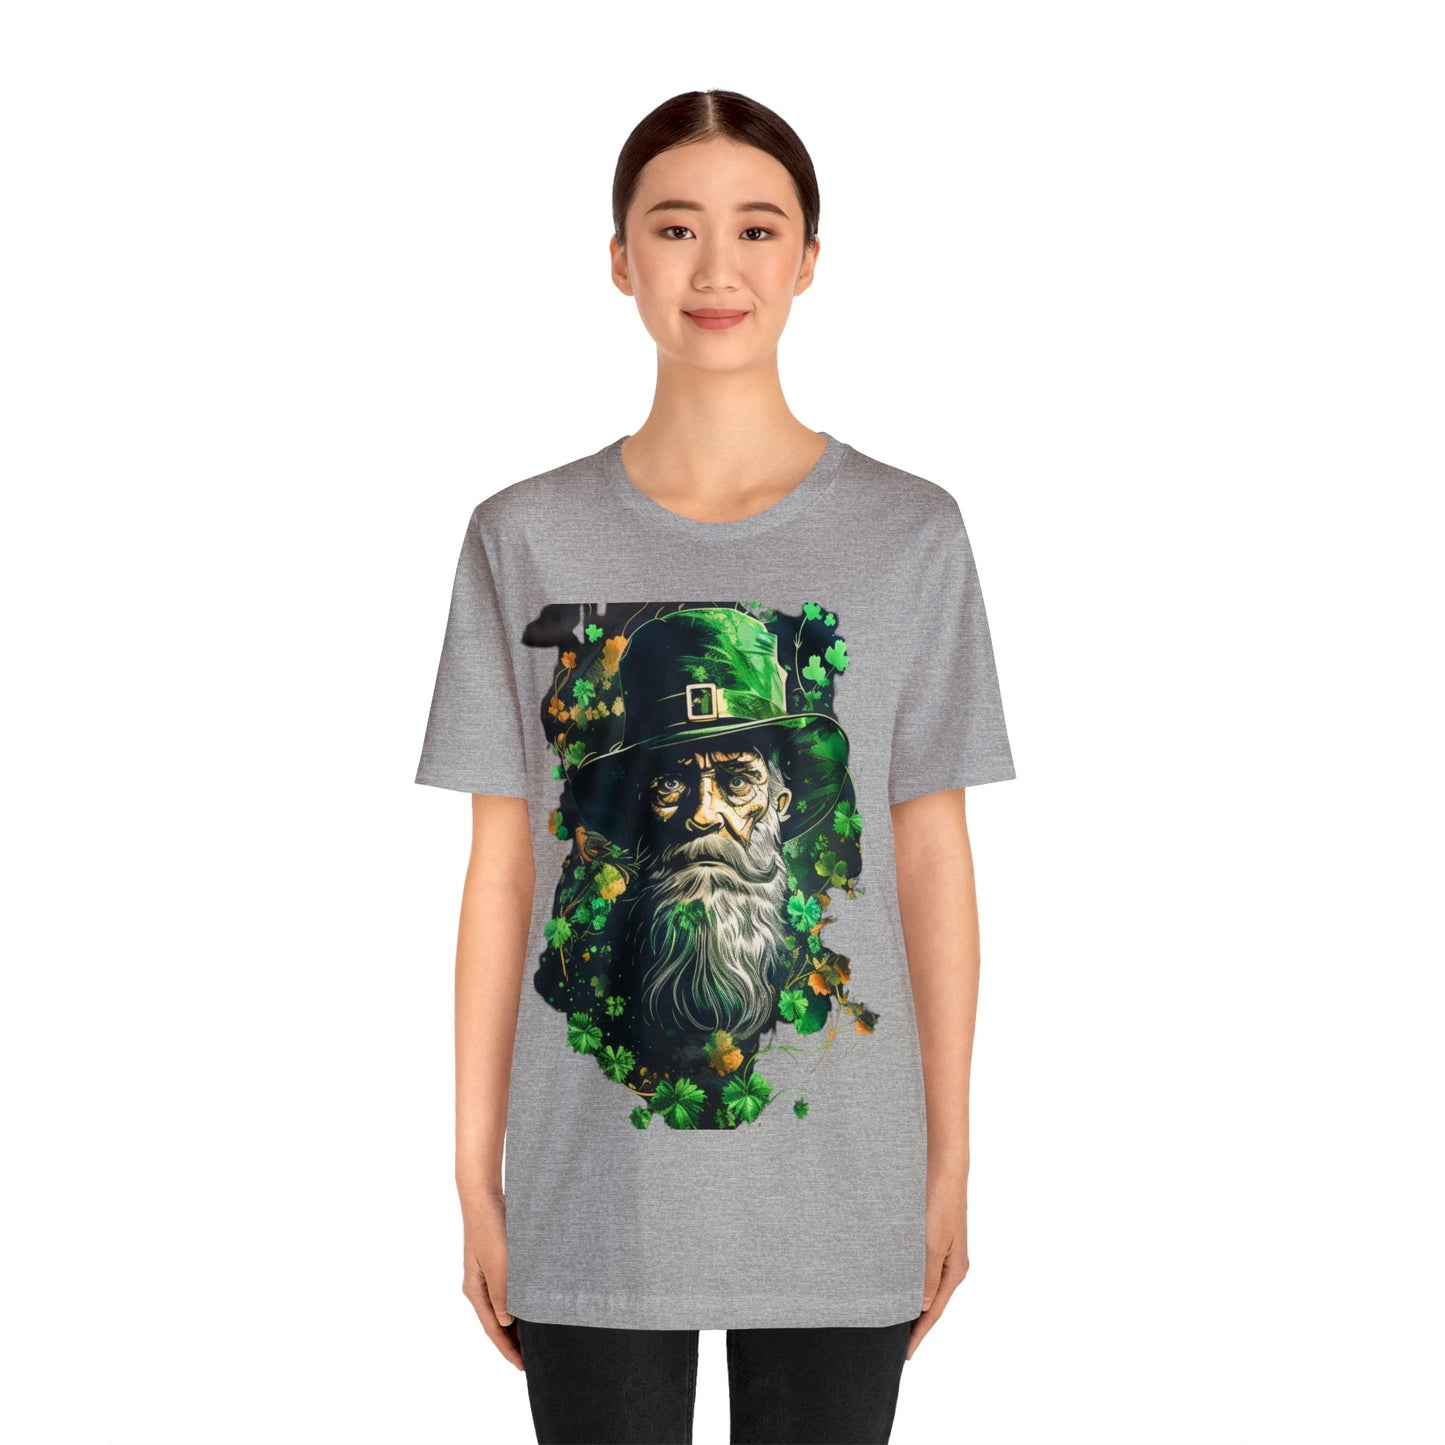 St Paddy Shirt St Patrick's Day Party Shirt Clover Shirt